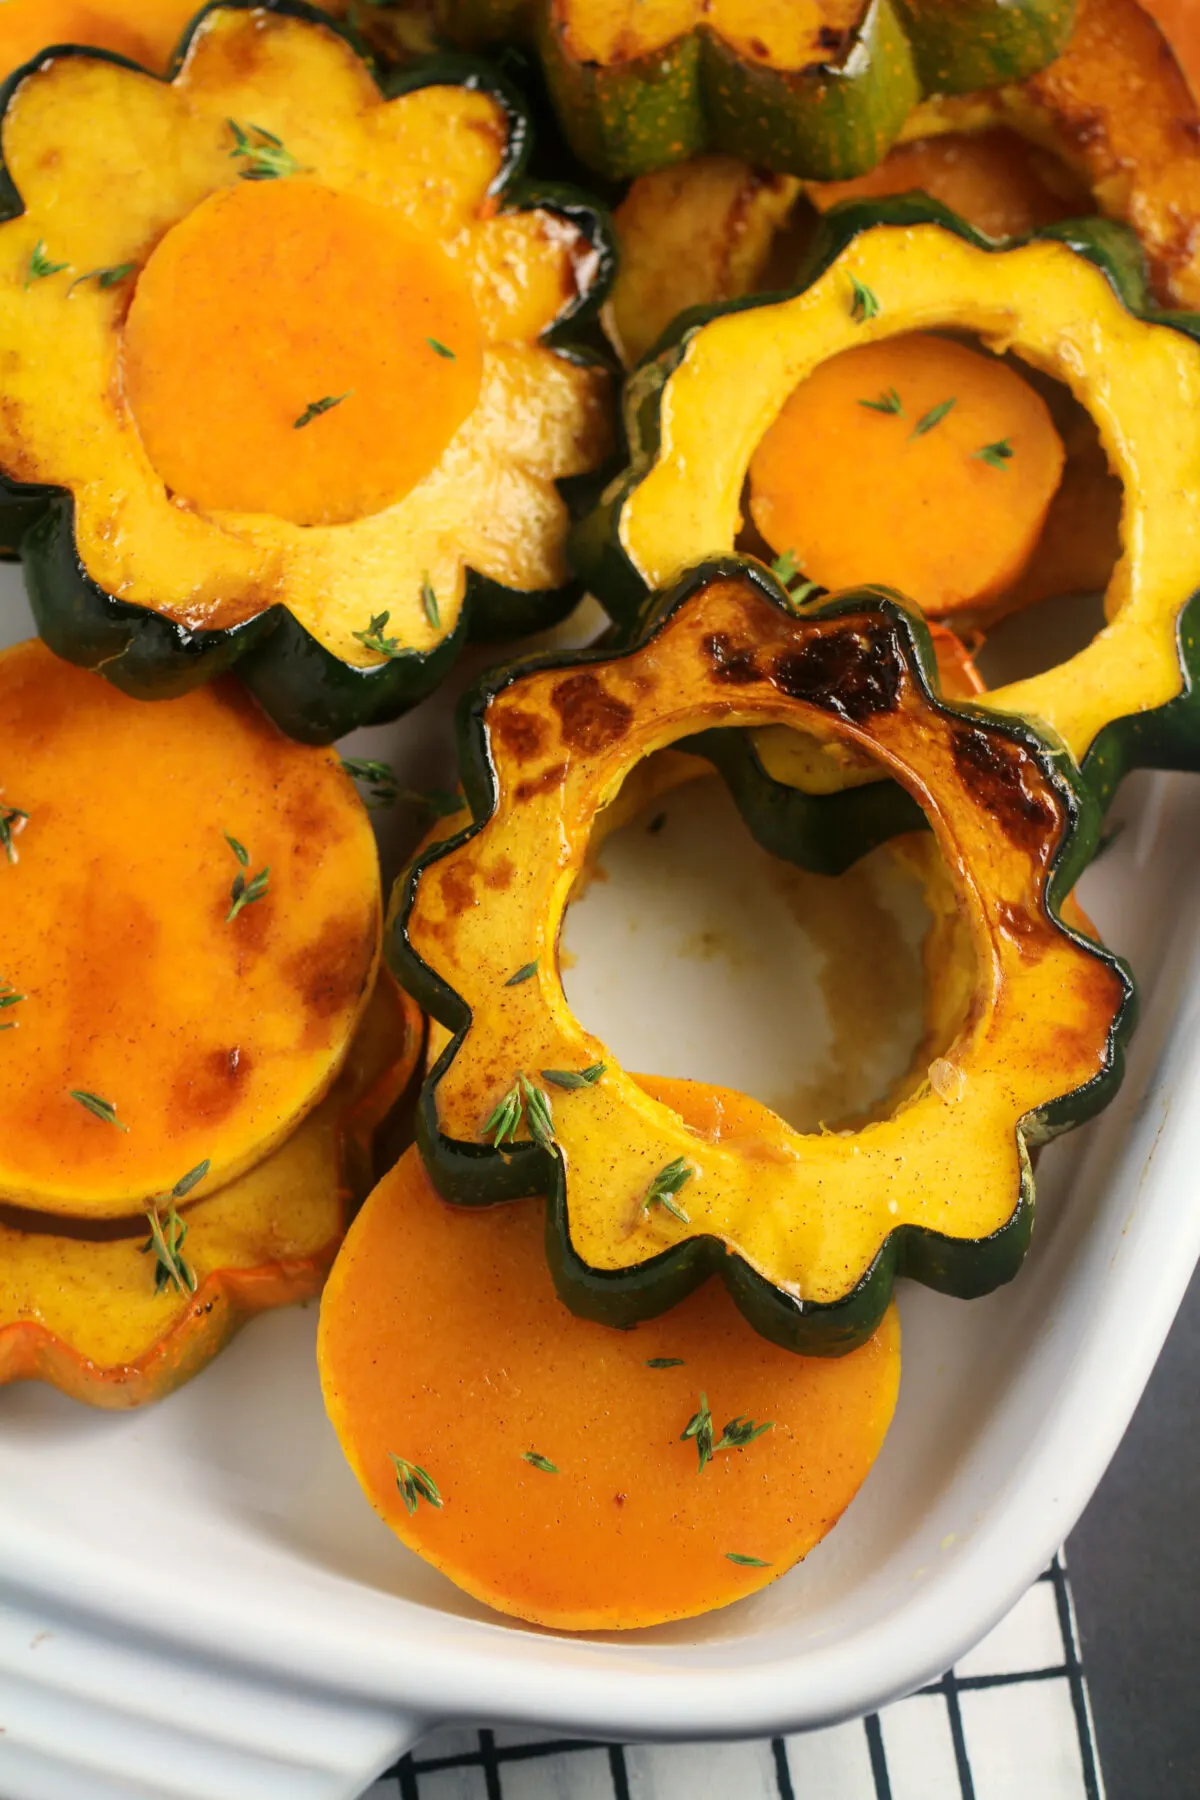 This Roasted Squash with Cranberry-Maple Glaze recipe makes for a perfect autumn side dish. A delicious Thanksgiving side dish!